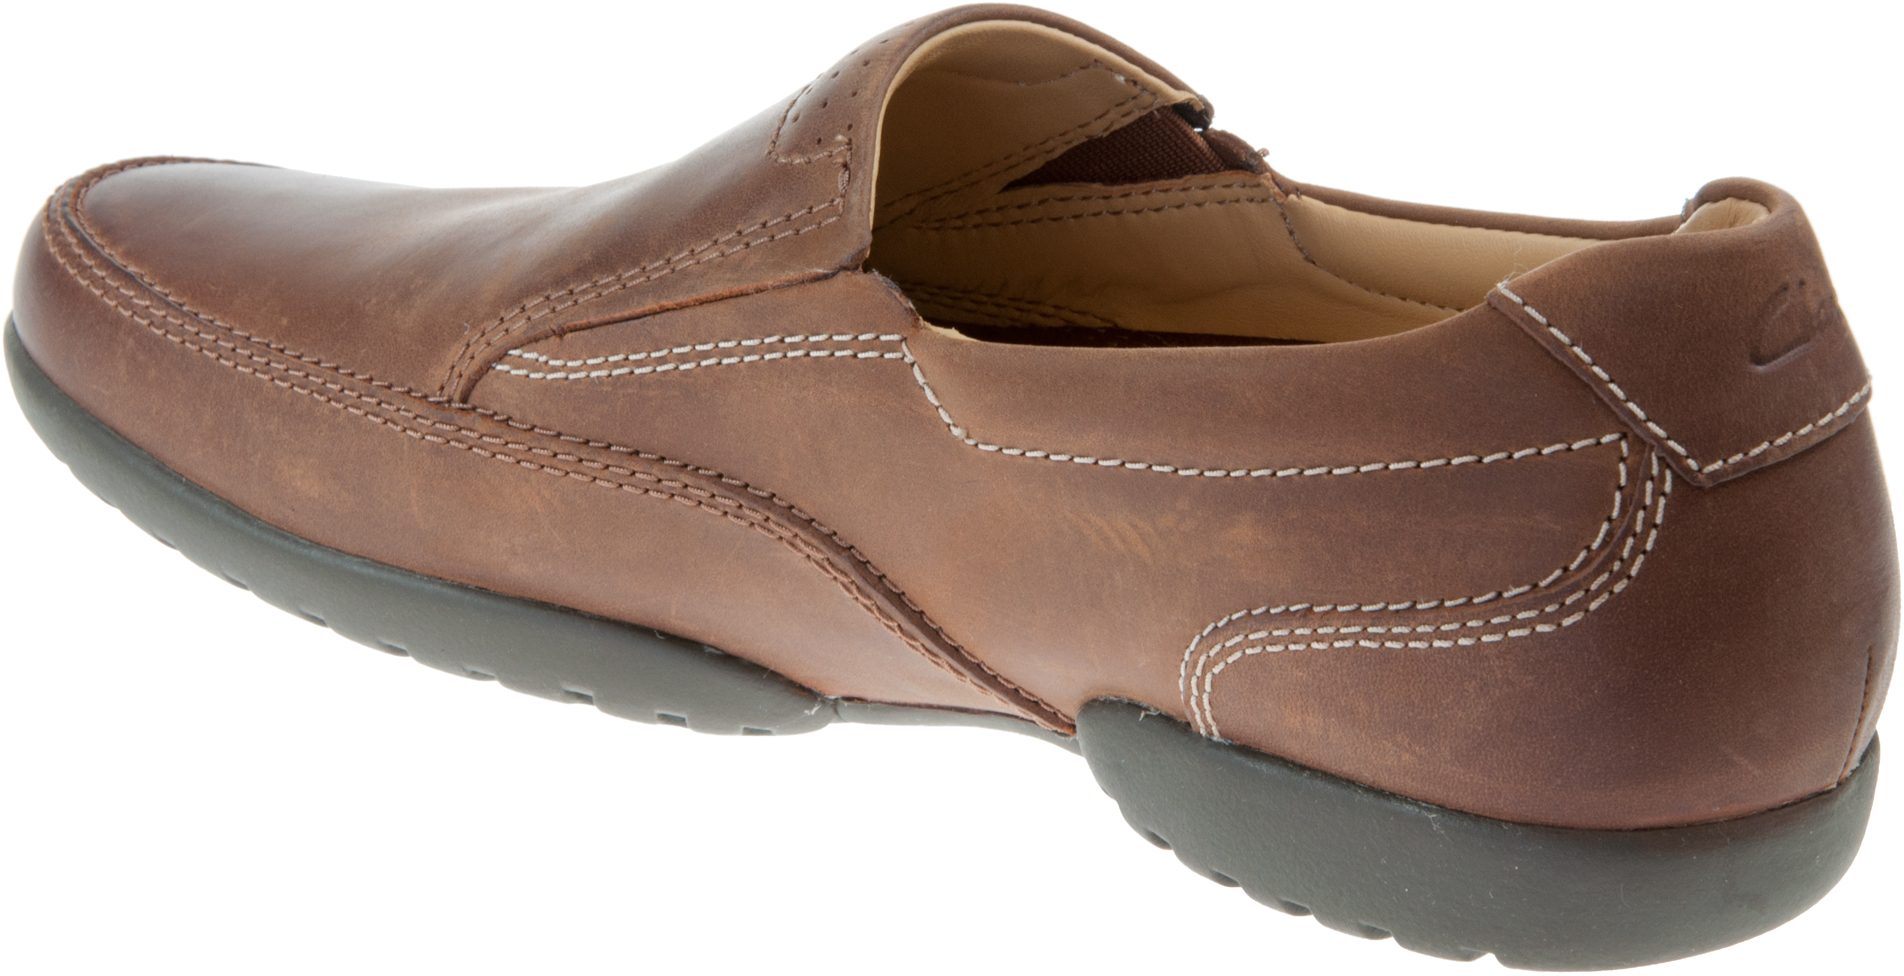 Clarks Recline Free Tan Leather 20348486 - Casual Shoes - Humphries Shoes